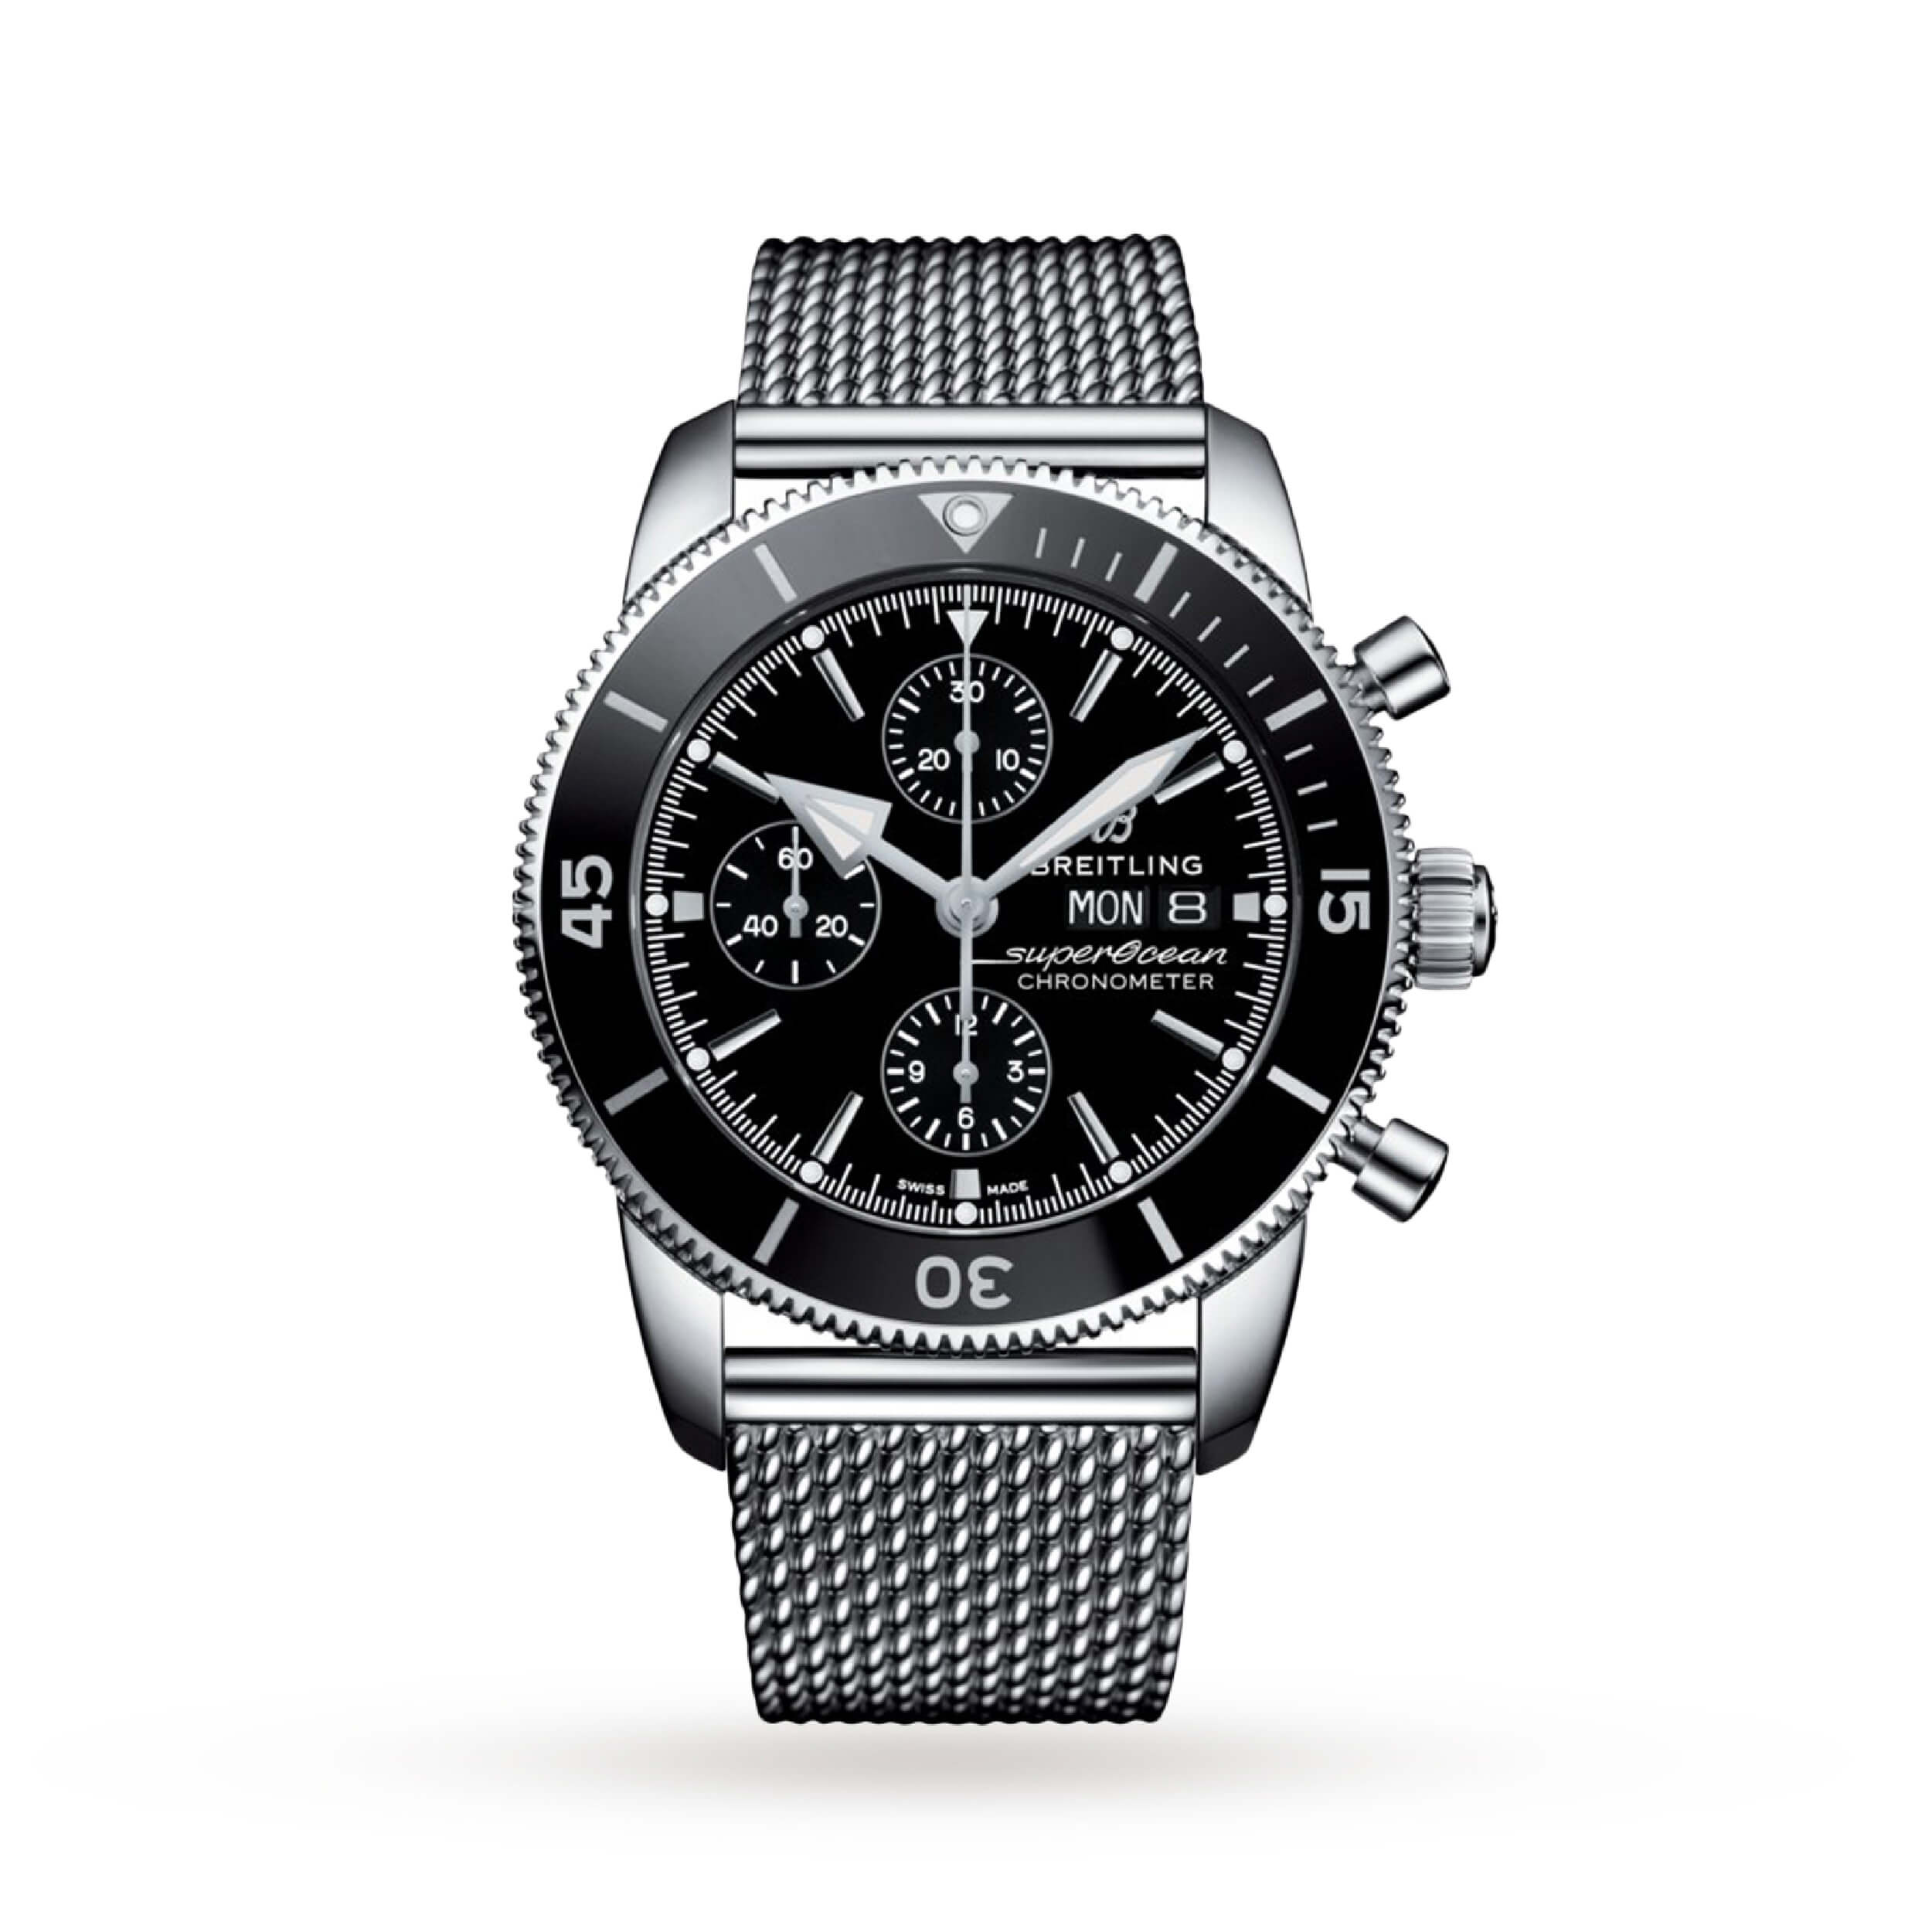 Breitling Superocean Héritage II Chronograph | Best Luxury Chronograph Watches 2021